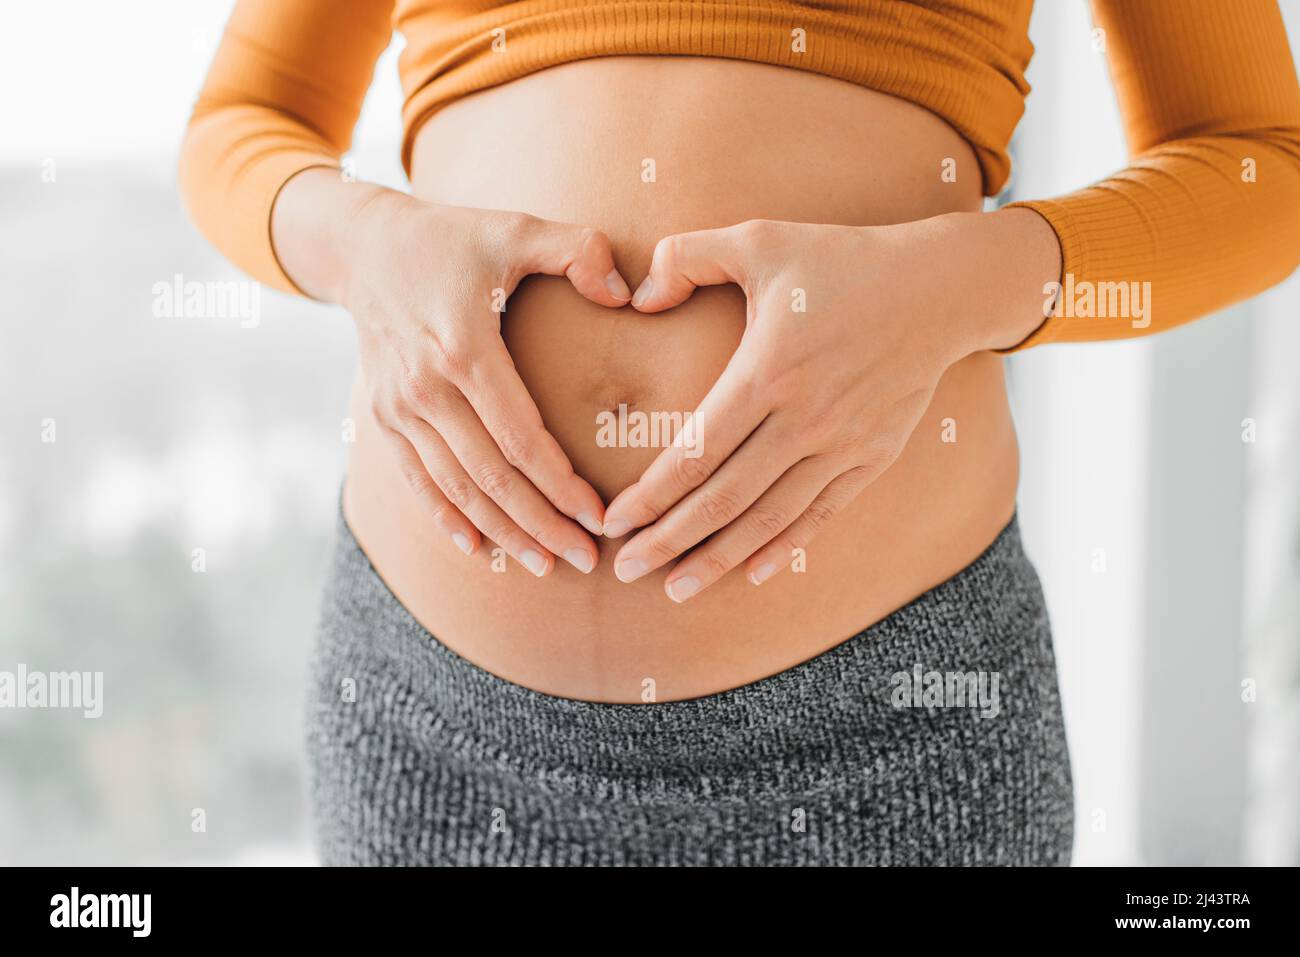 Pregnant woman holding stomach in heart shape gesture with hands on her belly. Pregnancy concept photoshoot Stock Photo